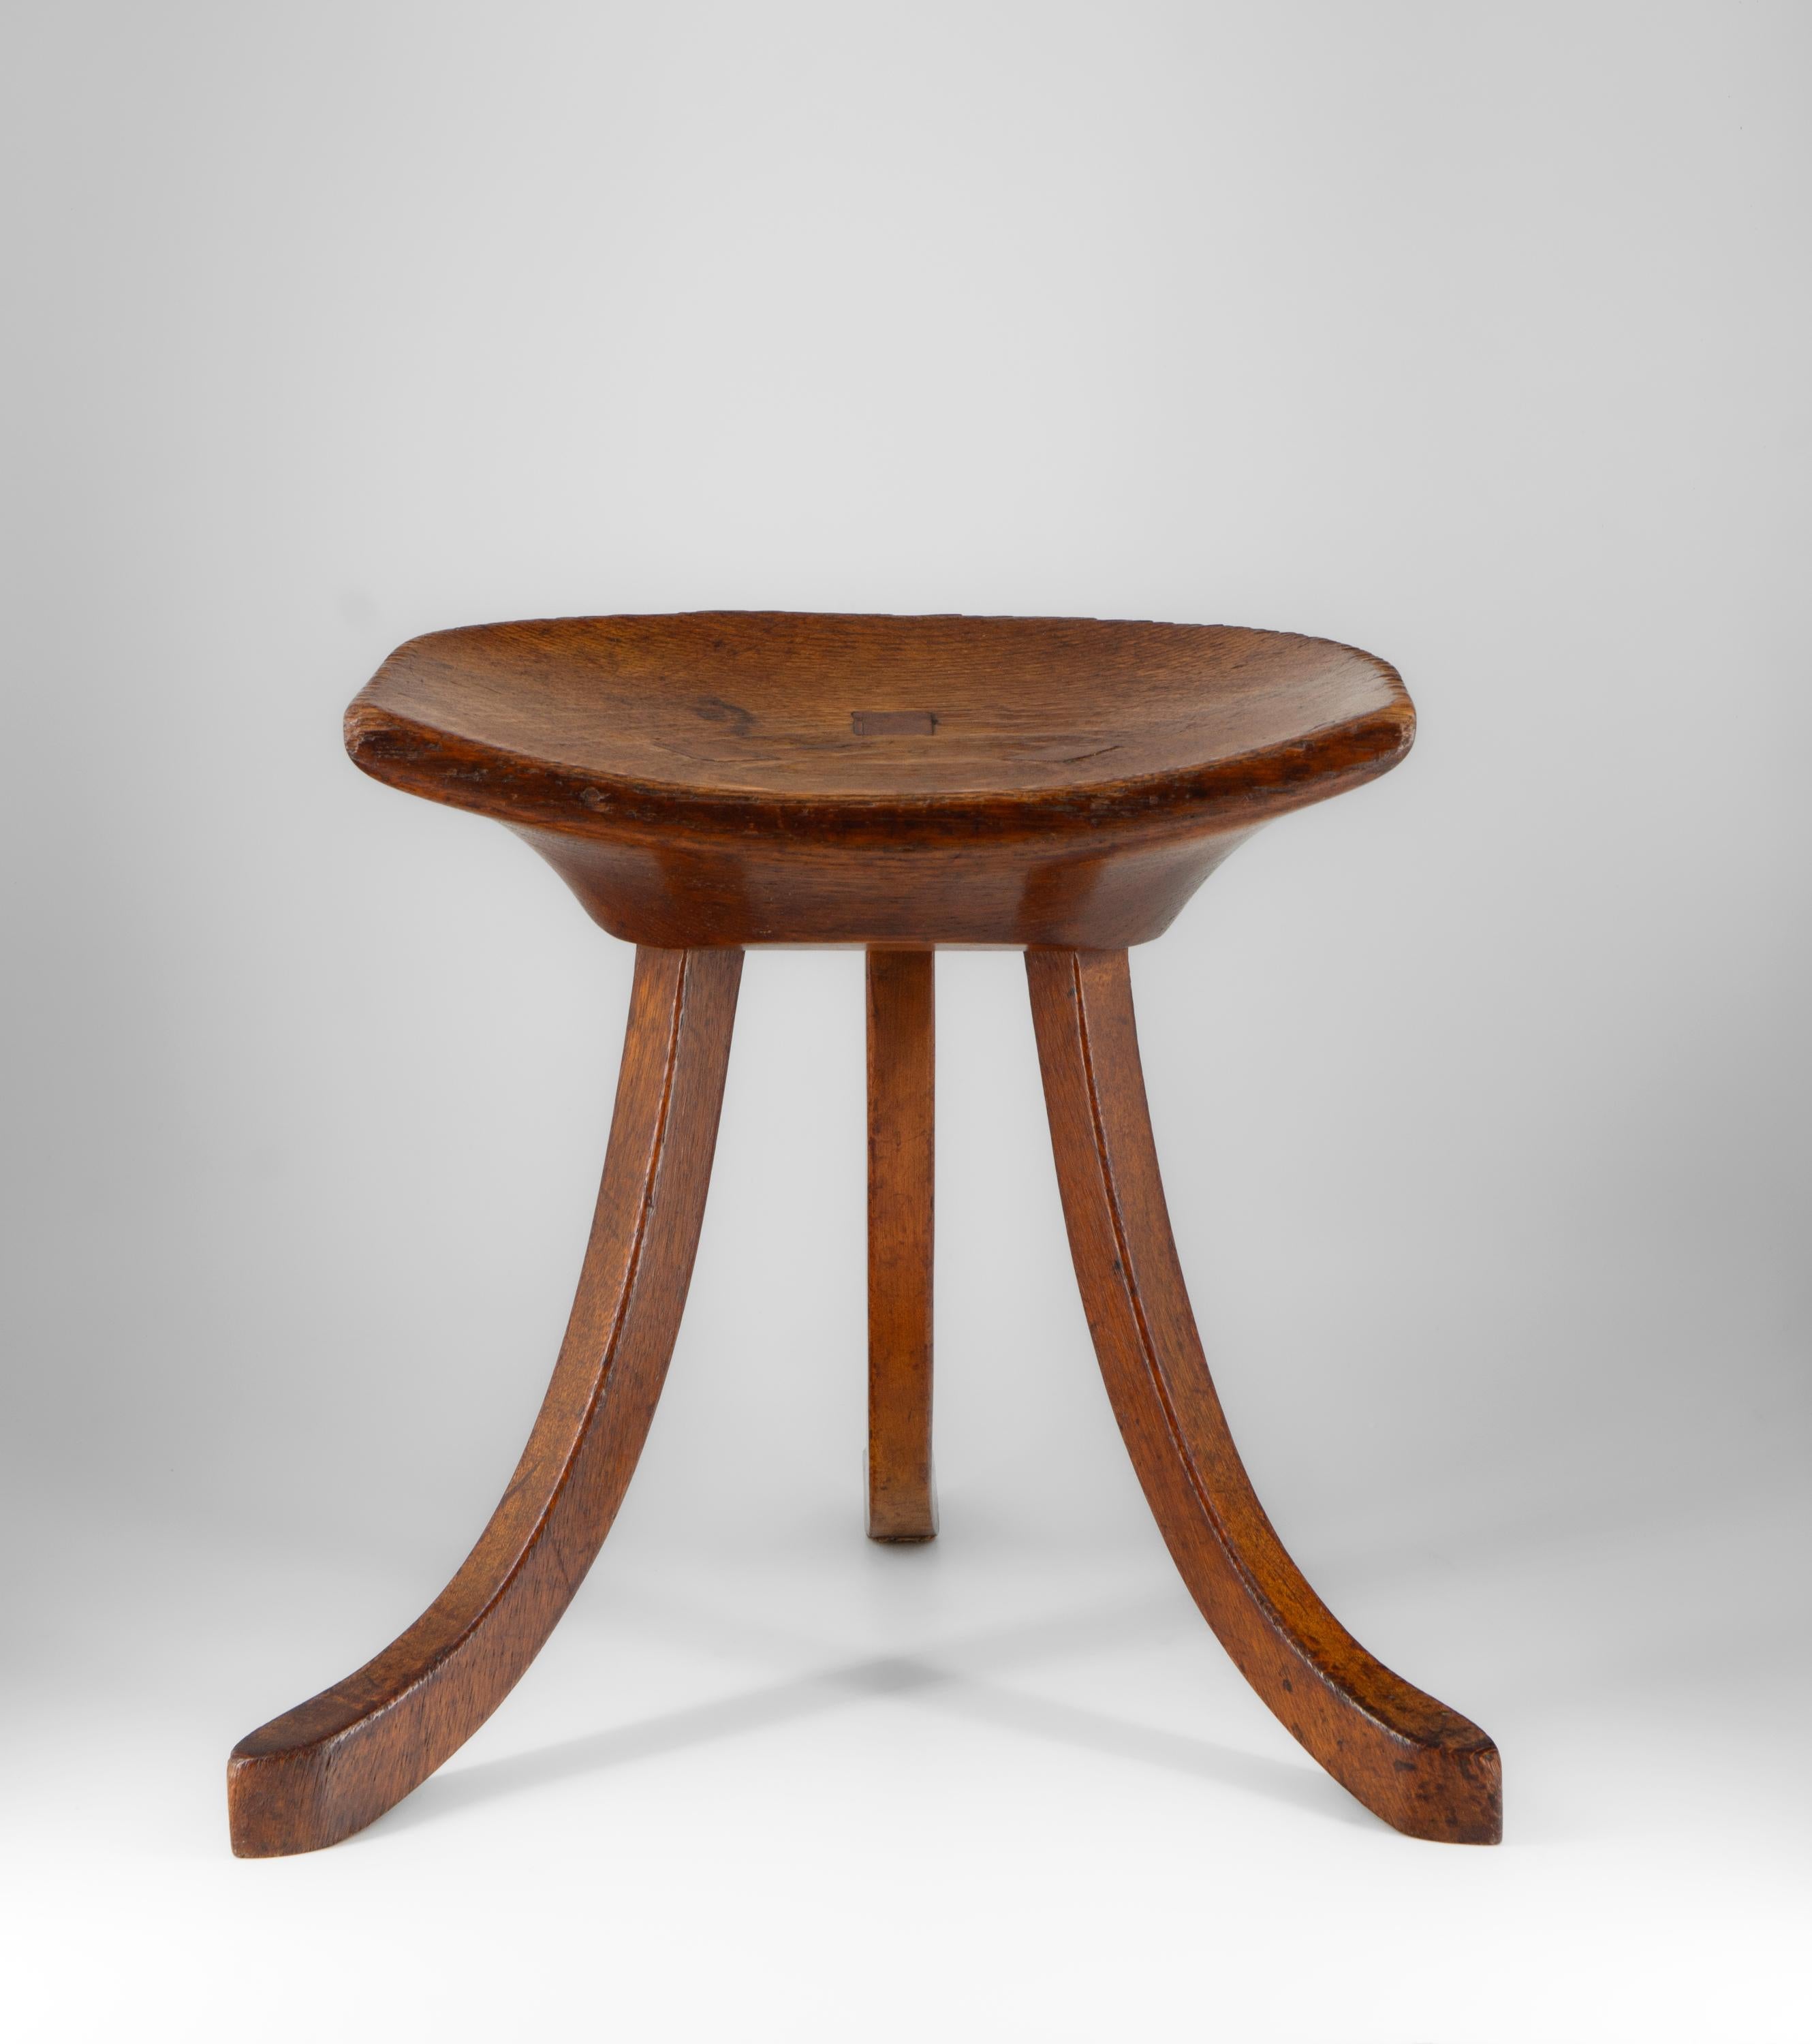 A Liberty & Co oak Thebes stool. Circa 1915.

The stool has a dished seat raised on three splayed supports and retains the original finish, which has been lightly waxed. It is a good example with no damage or repairs. Showing signs of use, the top